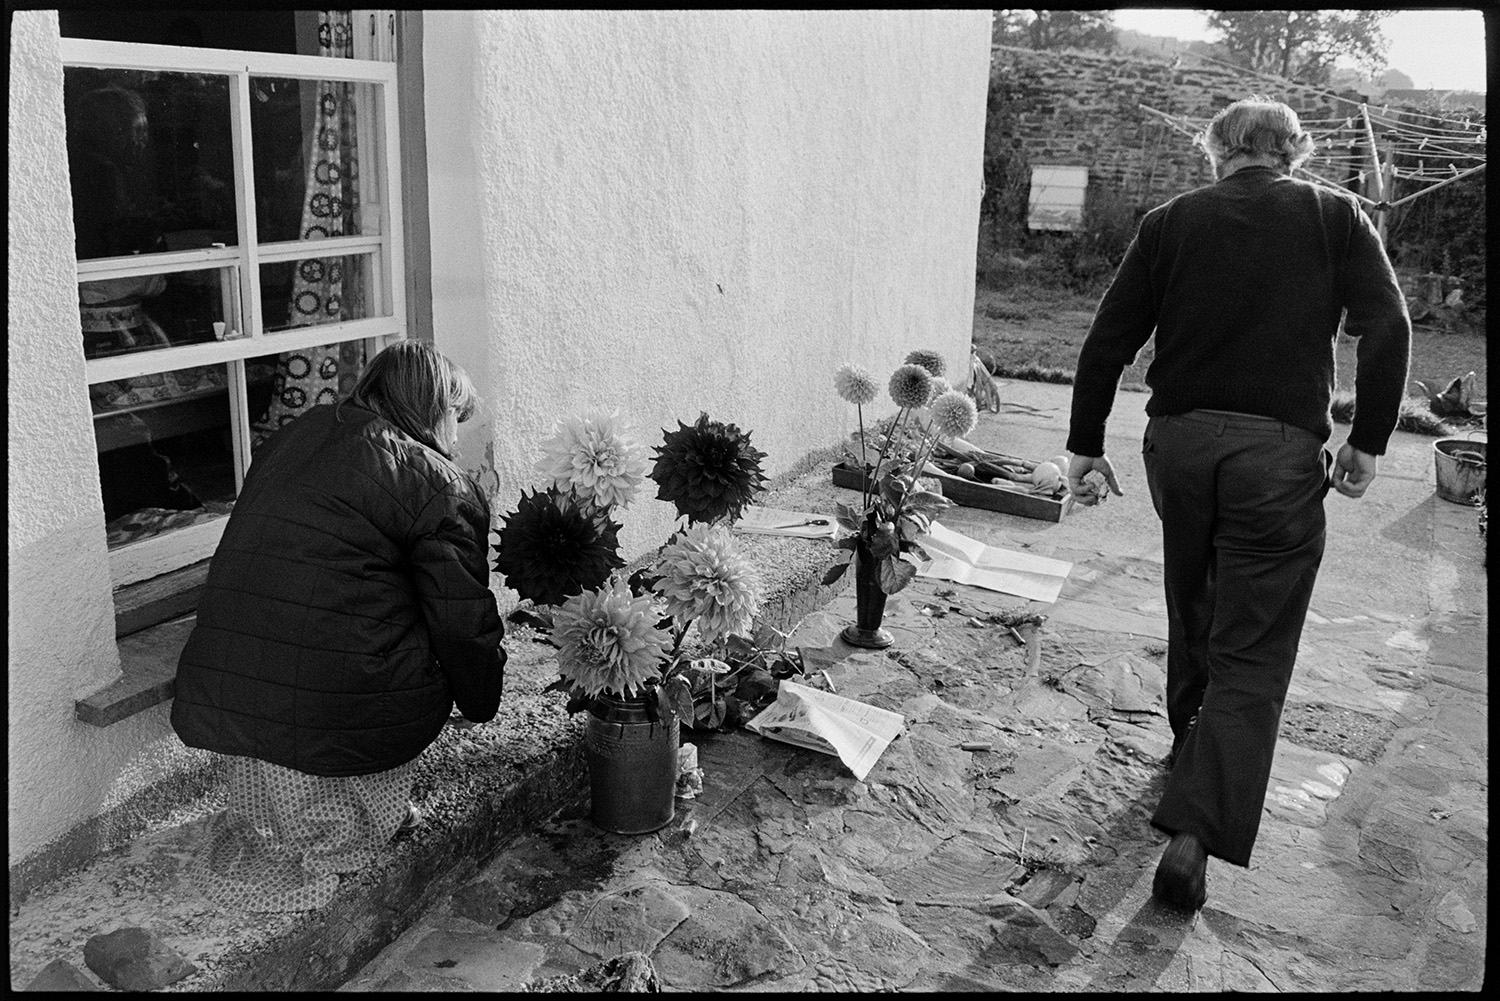 Preparing vegetables and flowers, flower show in garden with greenhouse. 
[Michael Mitchell and Rose Mitchell arranging dahlia flowers in vases on the patio in the garden at Pear Tree Cottage, Aller Road, Dolton, to enter into Dolton Flower Show.]